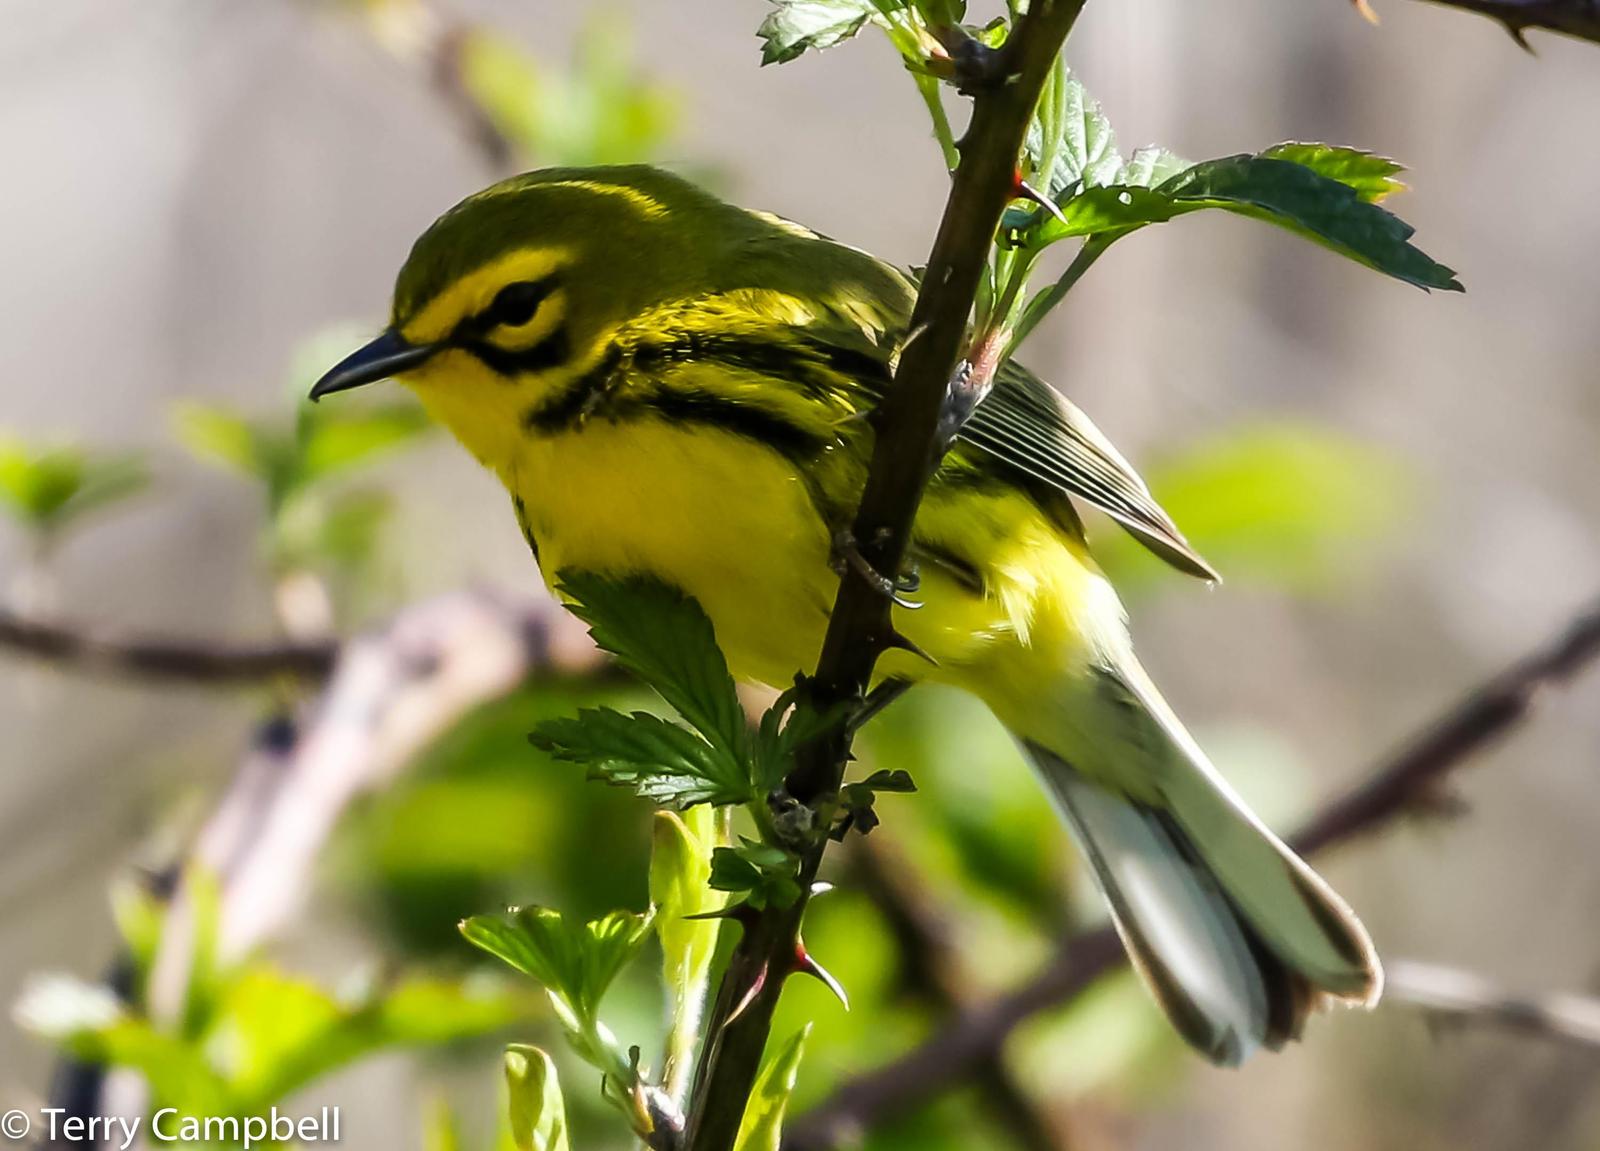 Prairie Warbler Photo by Terry Campbell